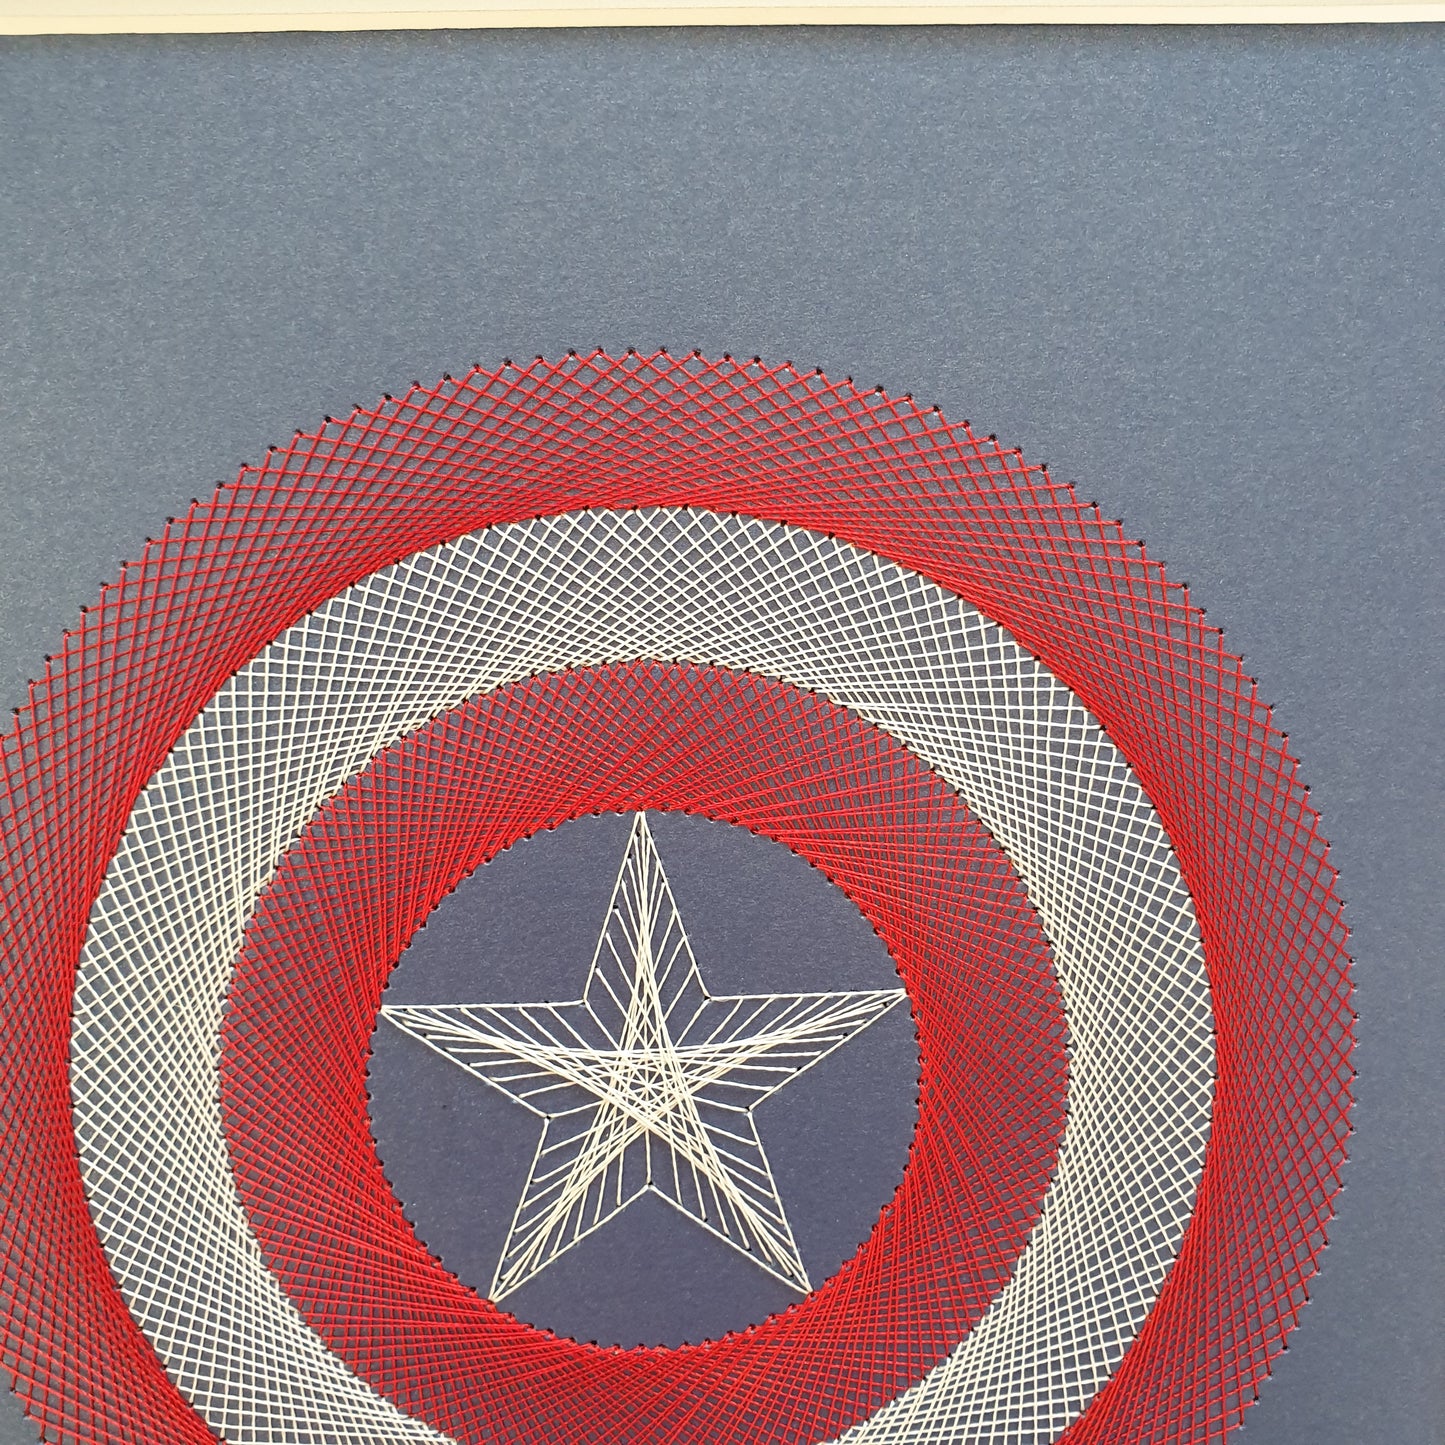 Captain America Inspired Hand-Stitched Artwork (Blue Card)